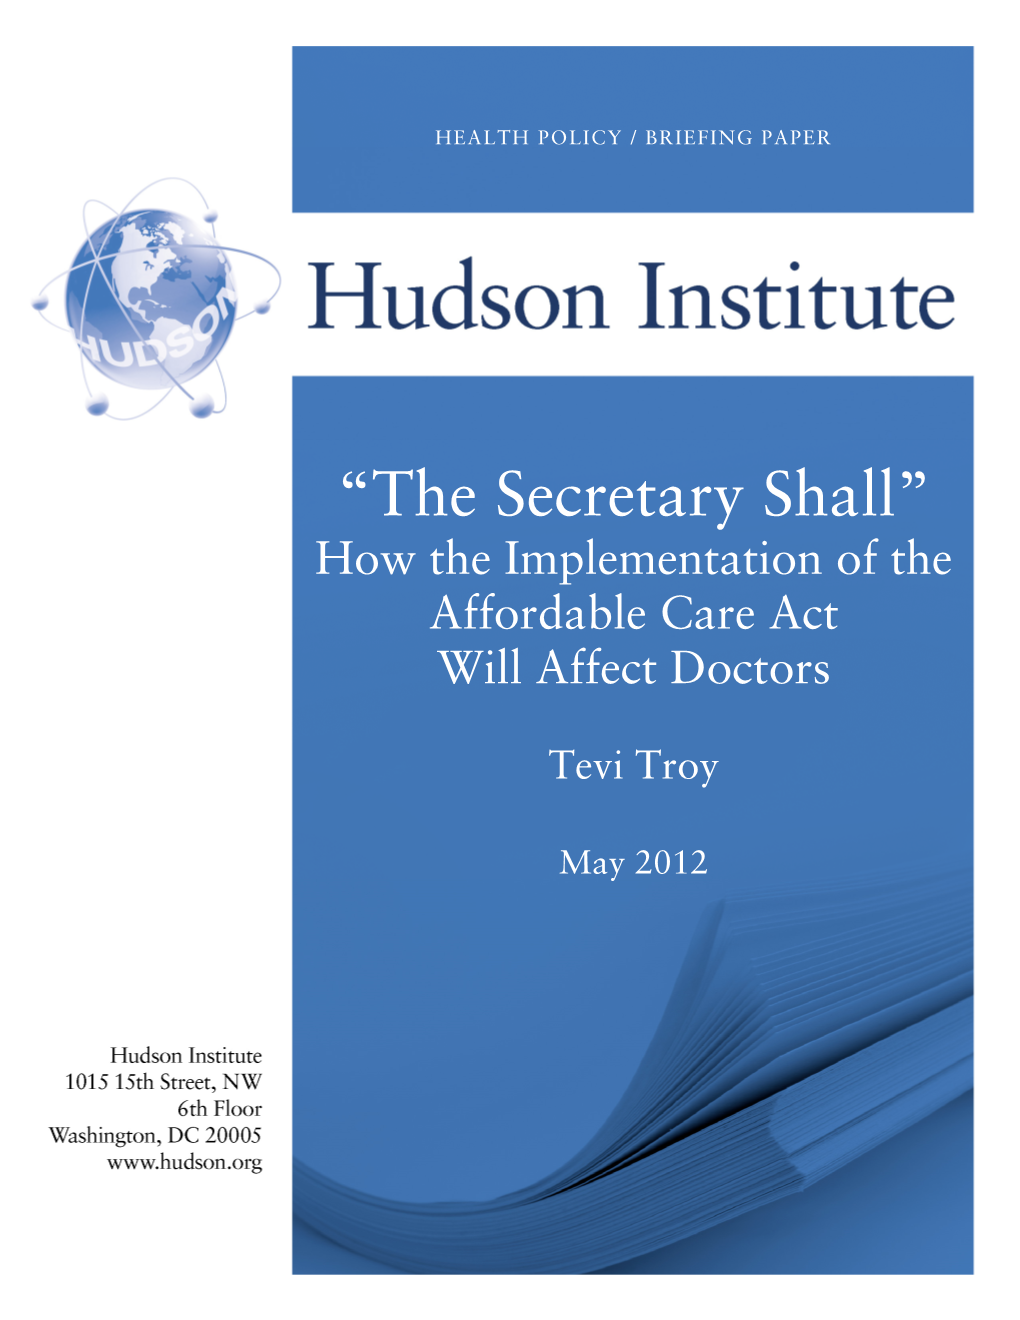 “The Secretary Shall” How the Implementation of the Affordable Care Act Will Affect Doctors